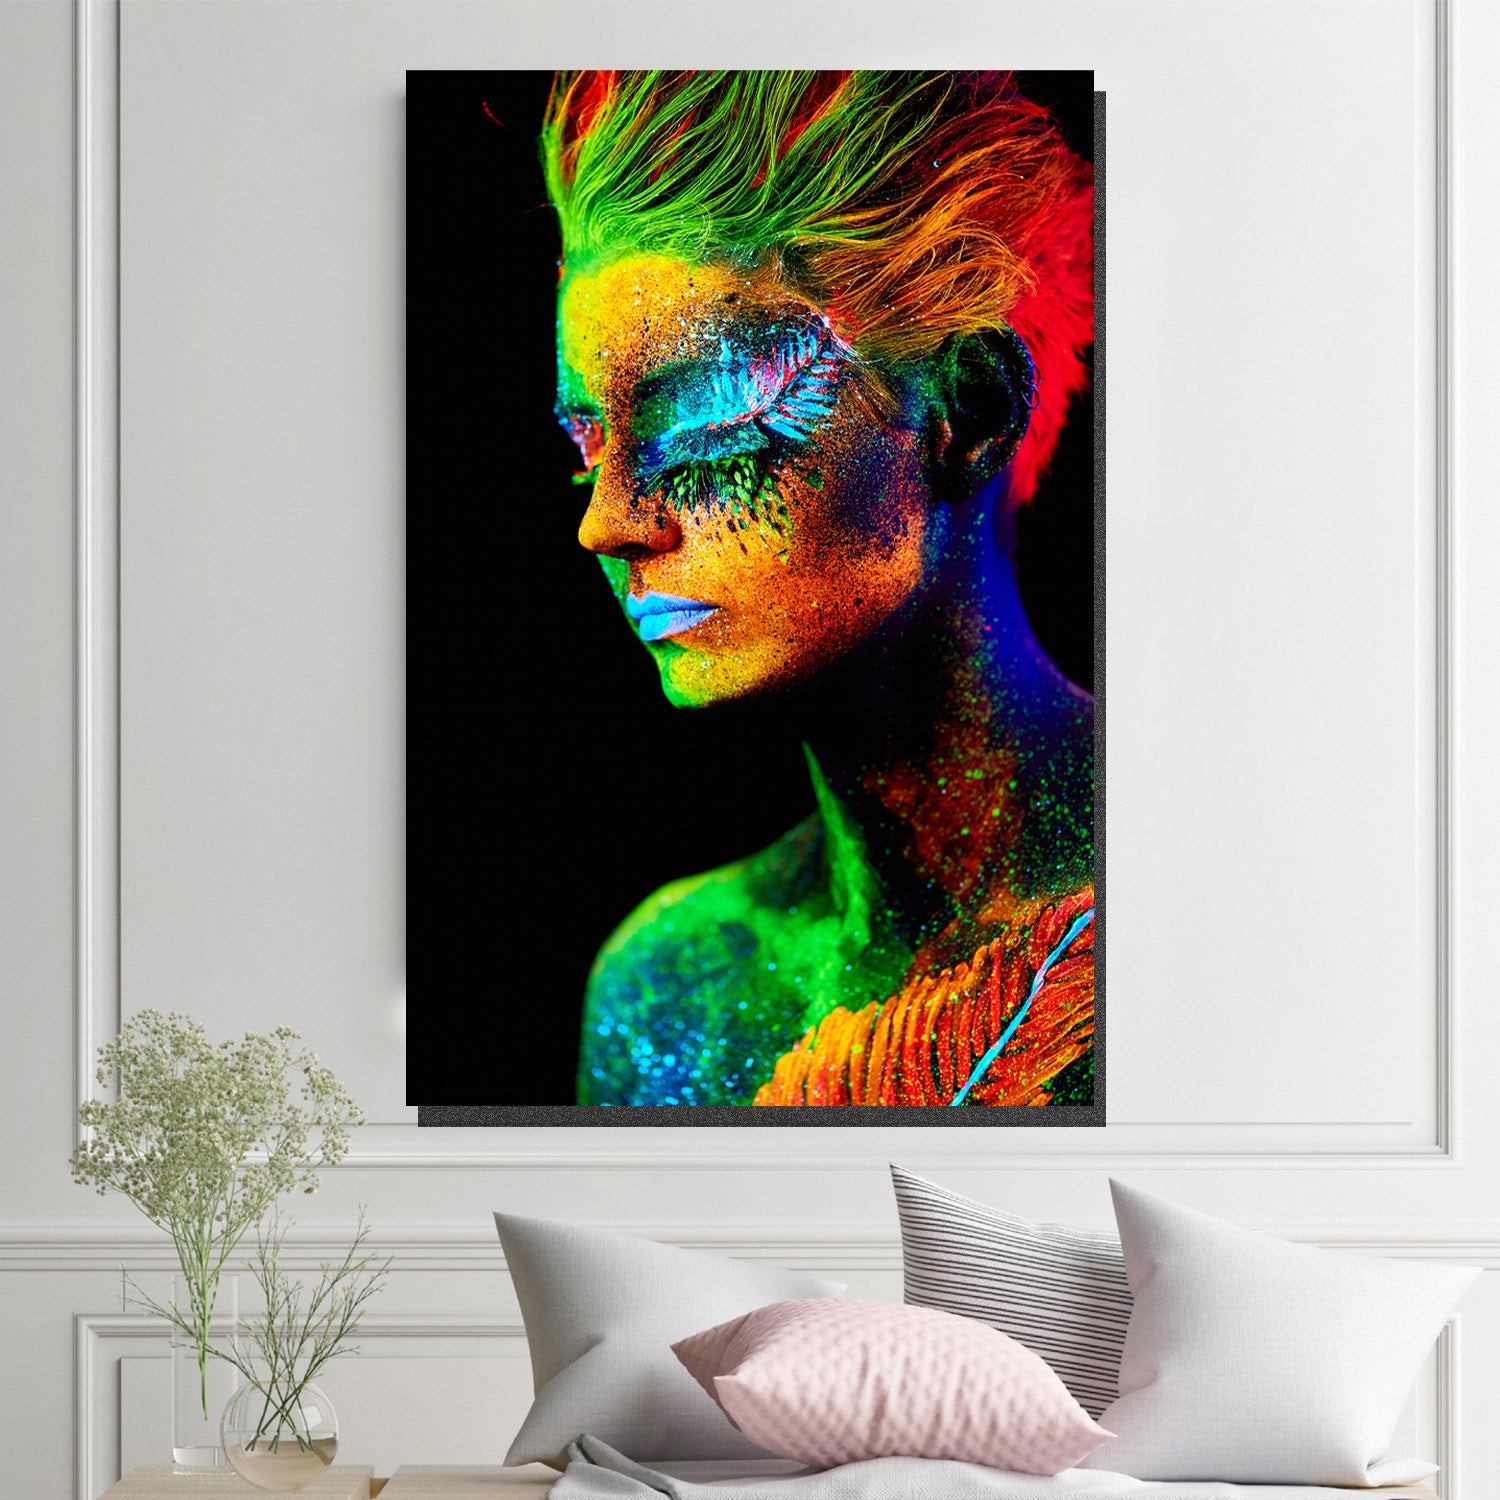 https://cdn.shopify.com/s/files/1/0387/9986/8044/products/ColoursofaWomanCanvasArtprintStretched-3.jpg